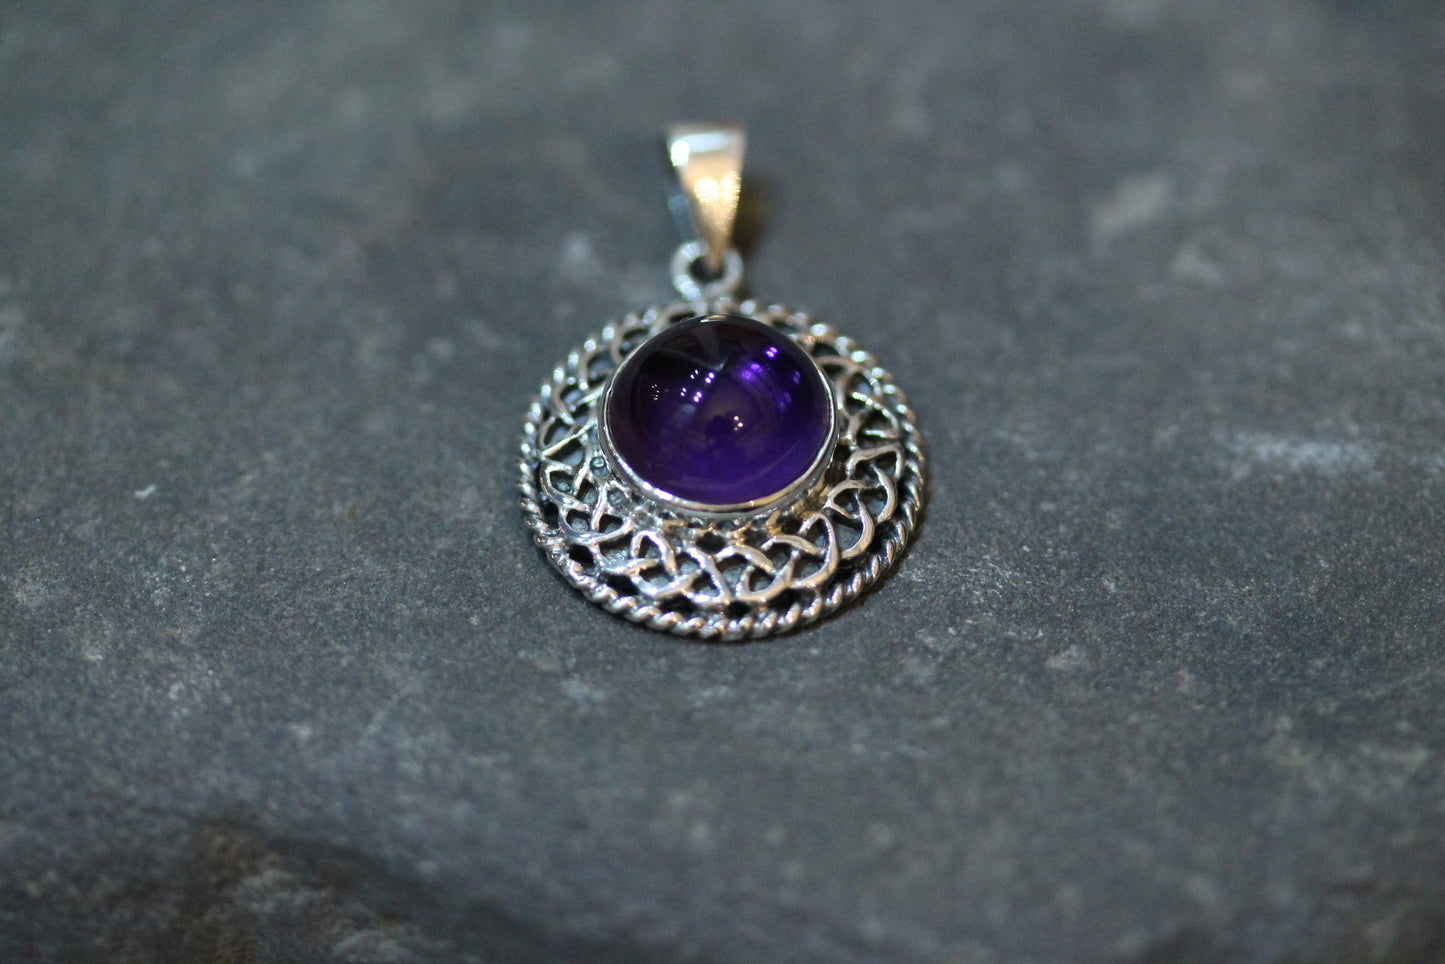 Celtic Stone Pendant - Round Knotted Border with Amethyst